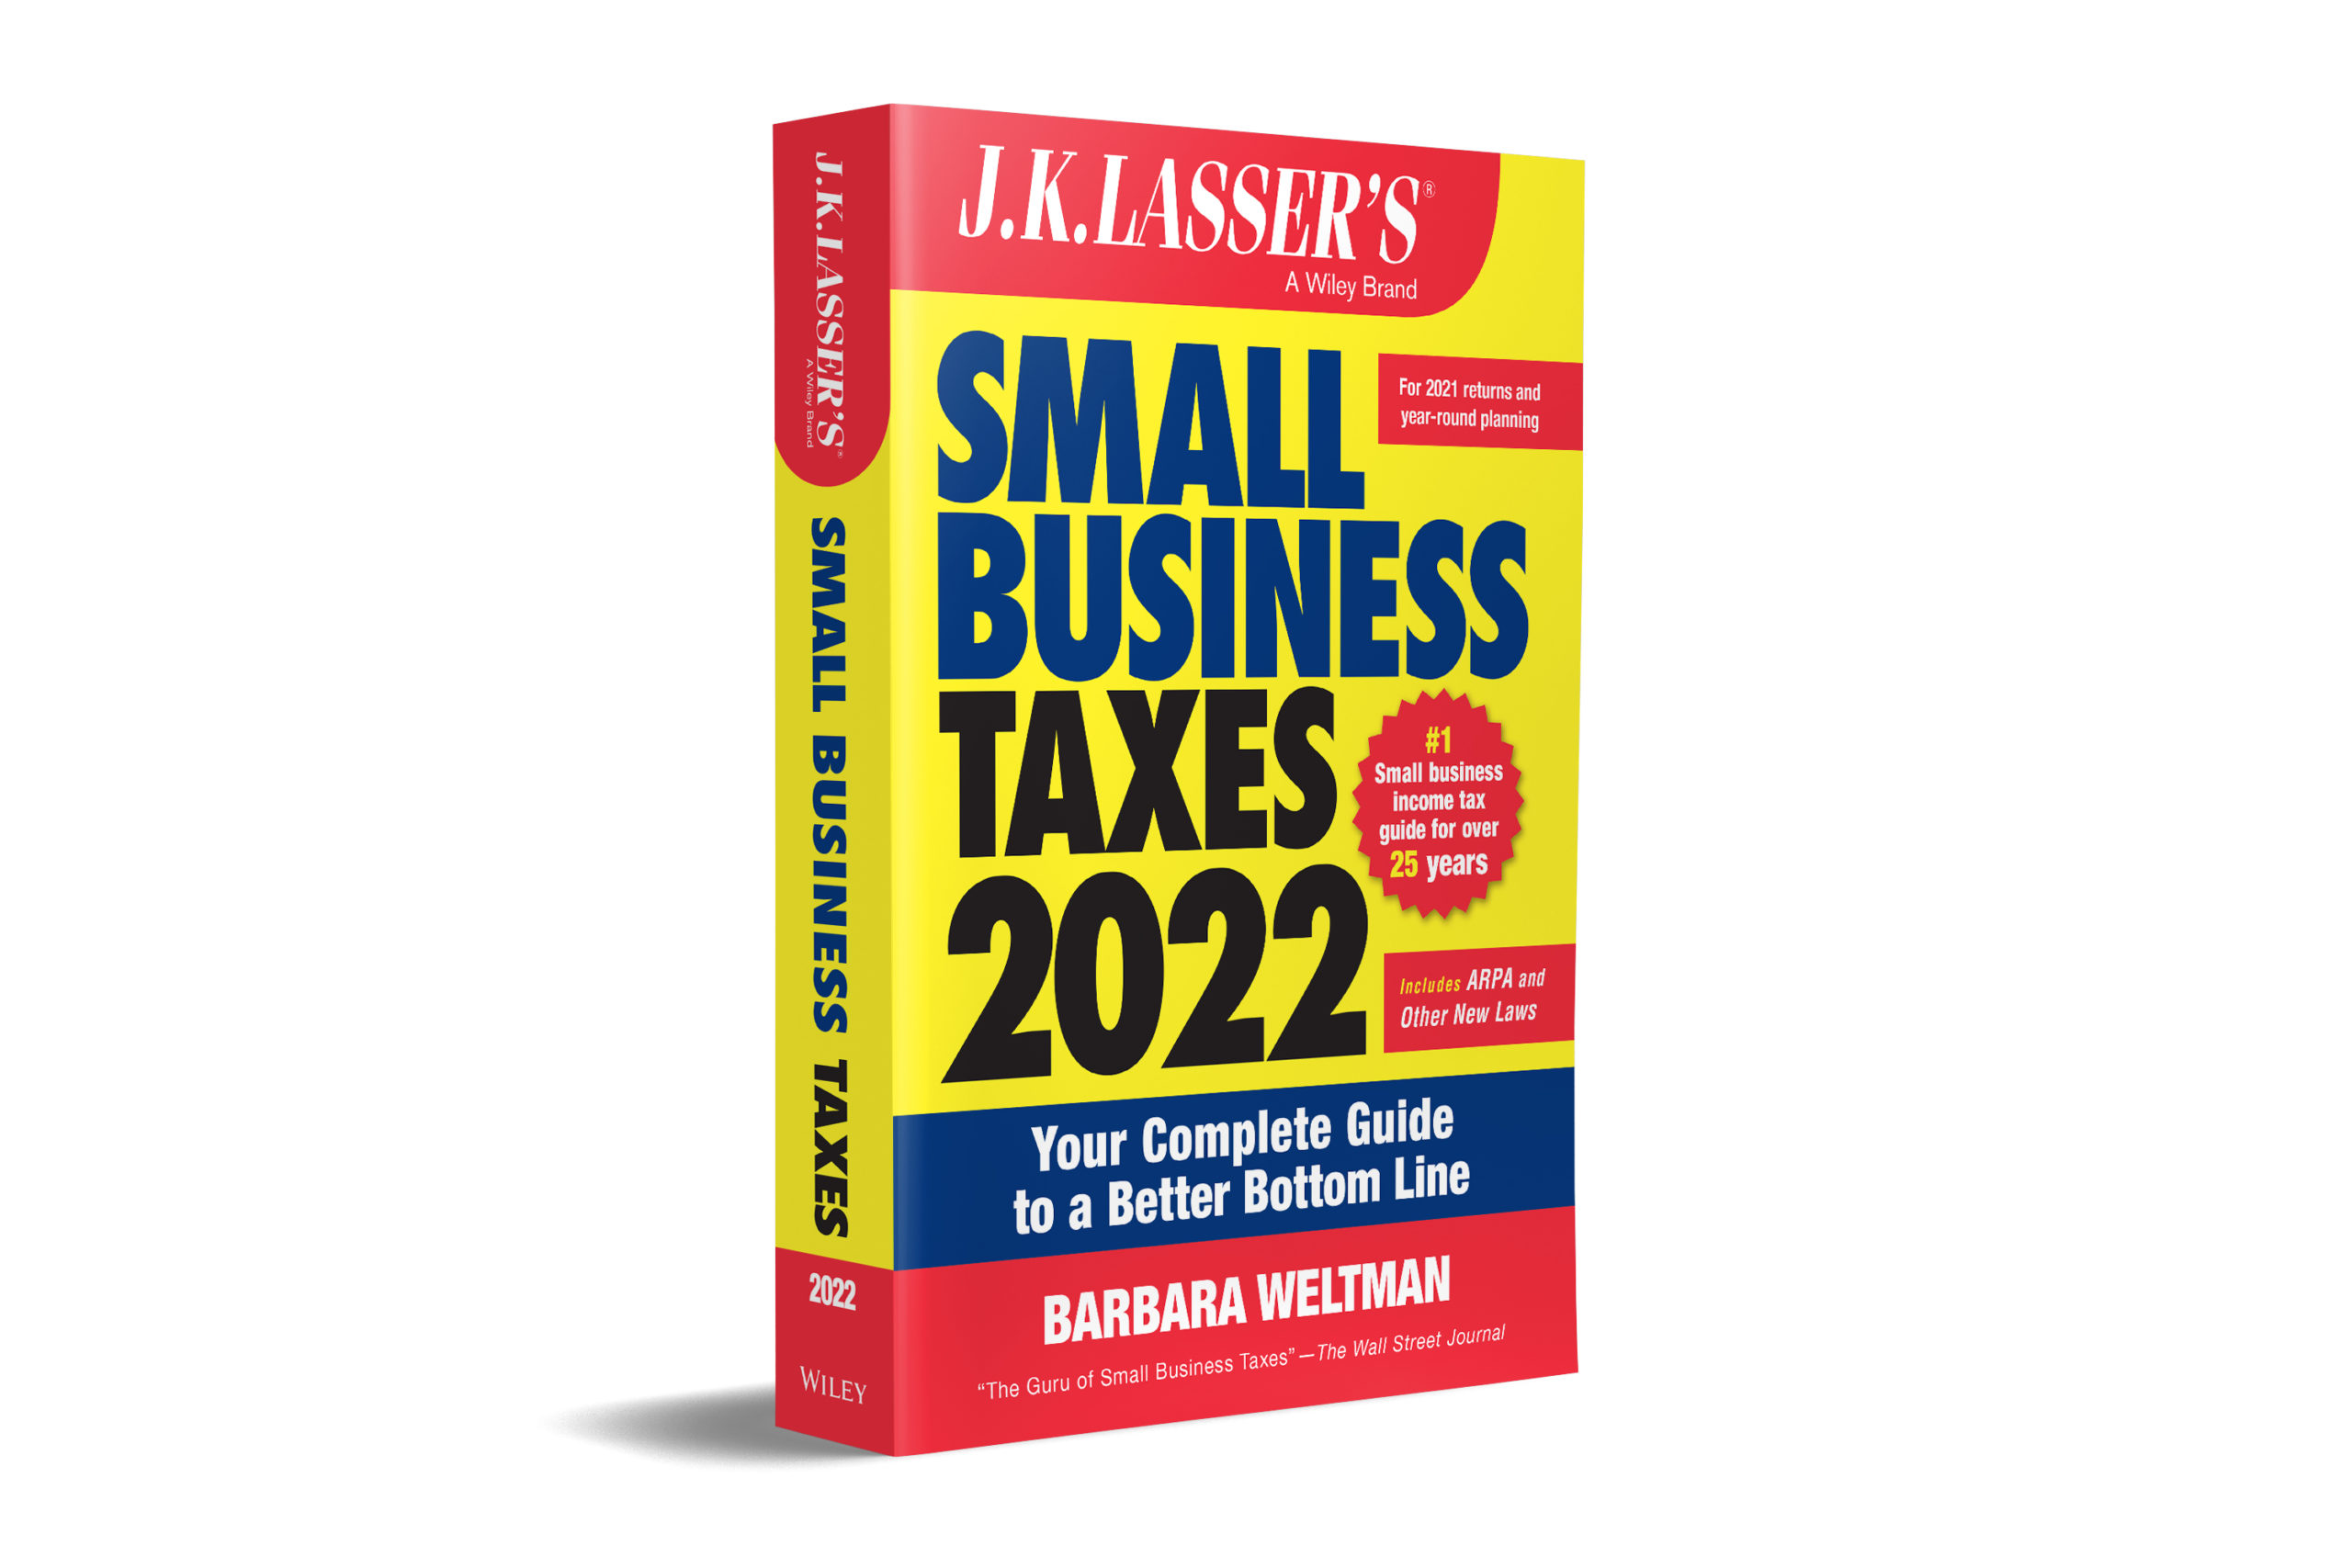 Book Cover: J.K. Lasser's Small Business Taxes 2022